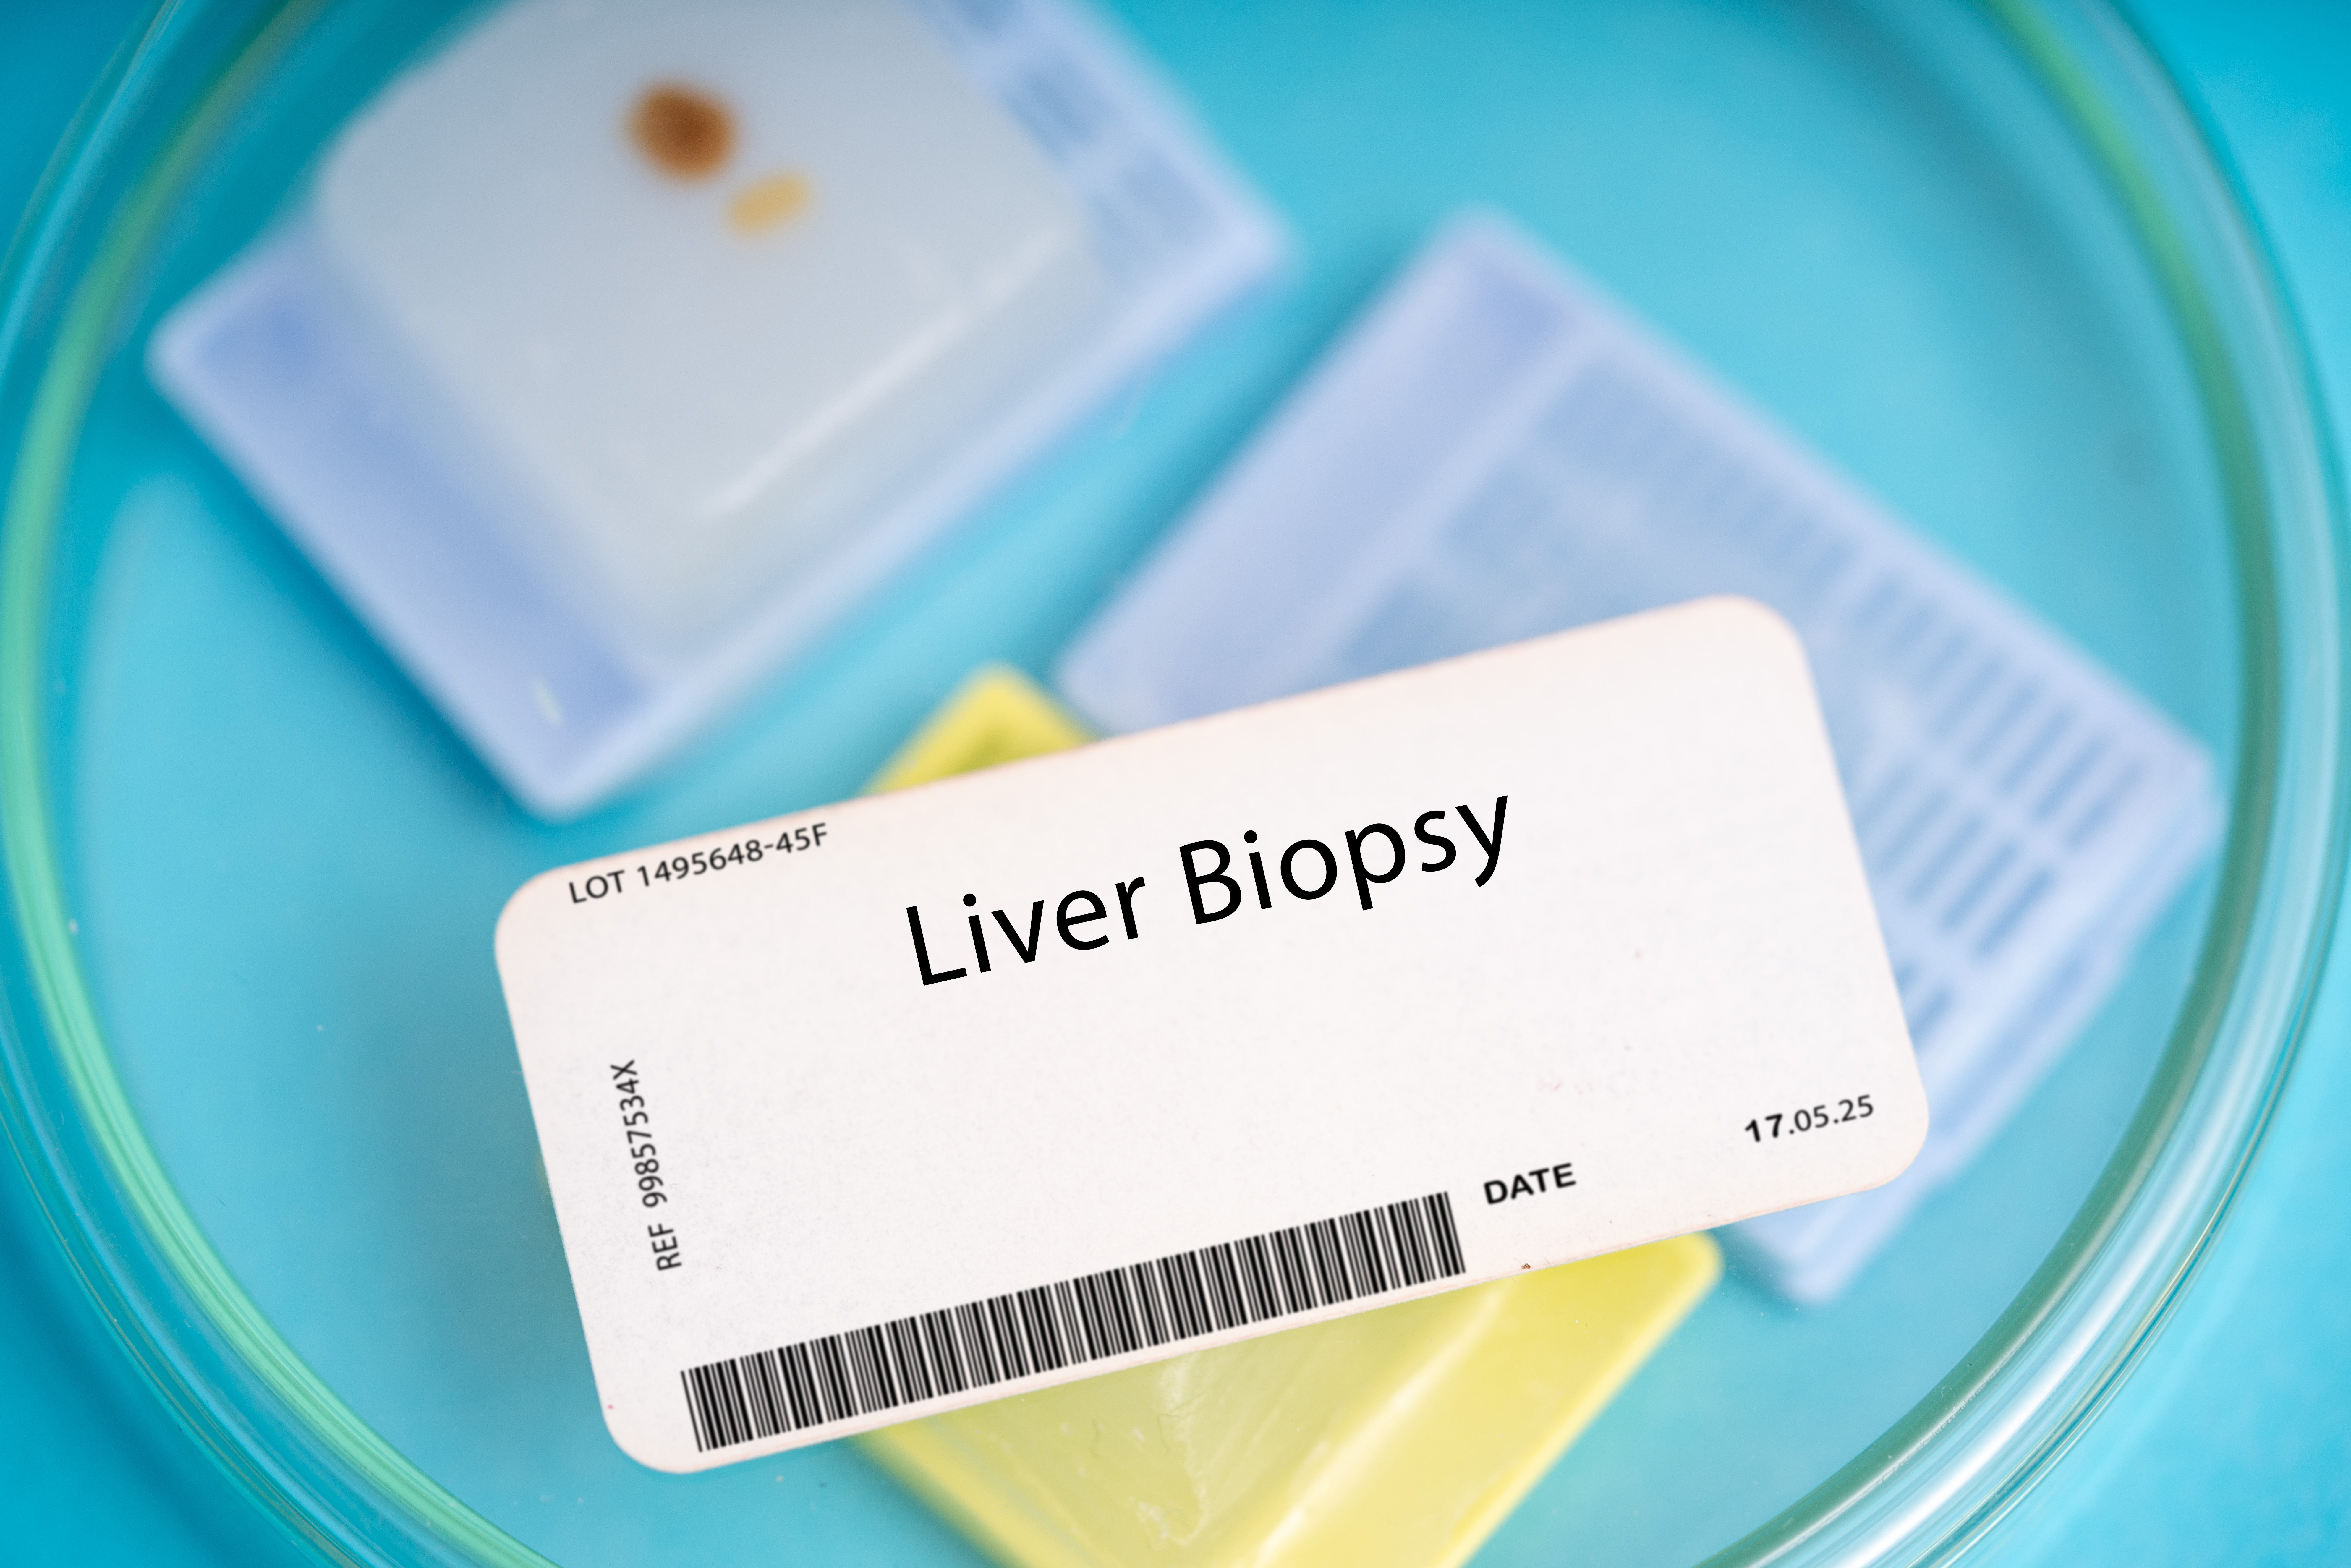 Liver biopsy. A small piece of liver tissue to evaluate for conditions such as cirrhosis, hepatitis, or liver cancer.